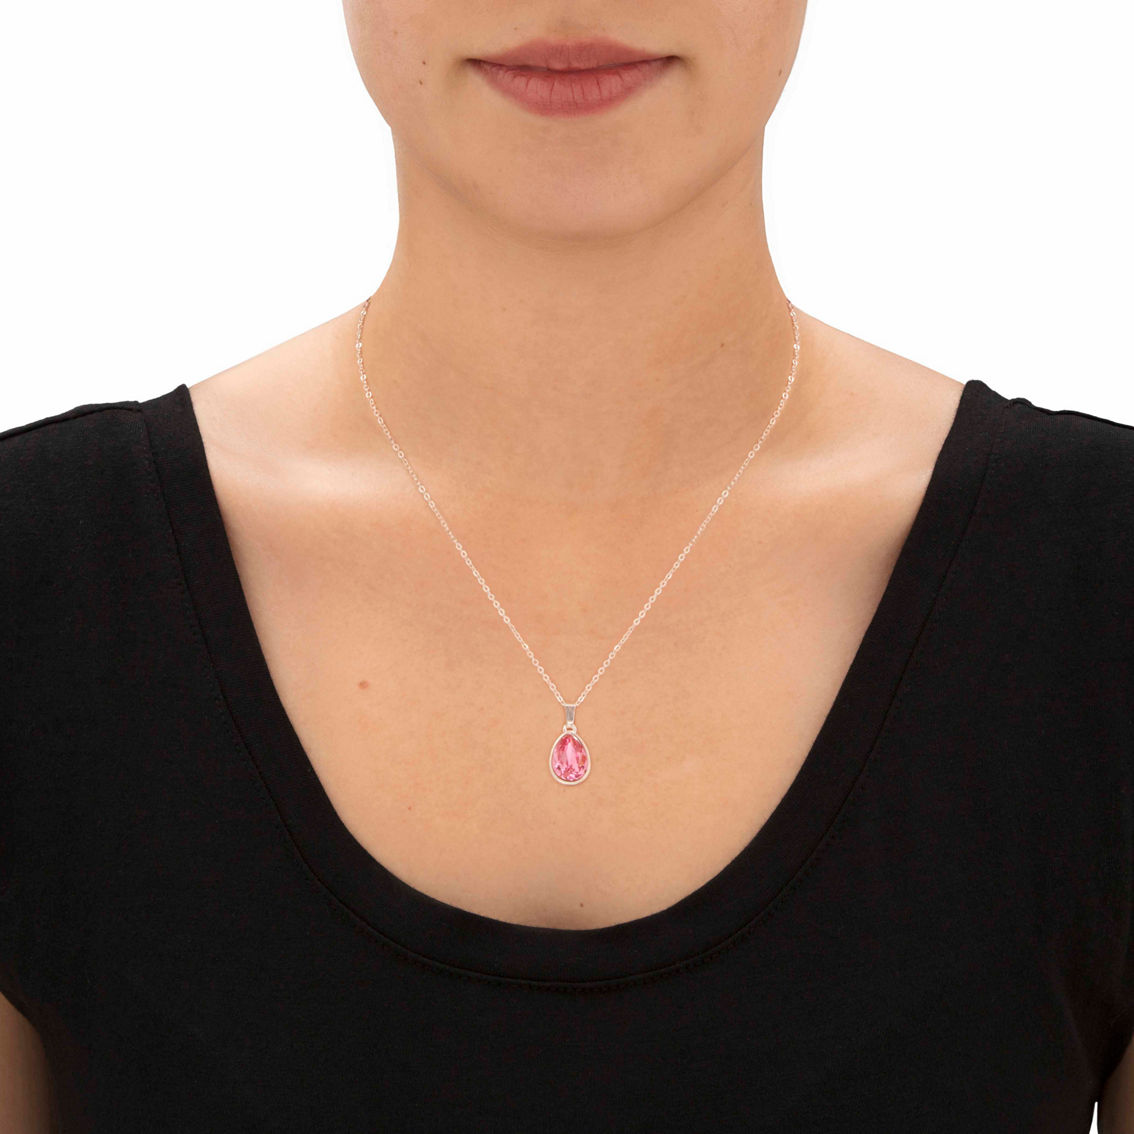 PalmBeach Pear-Cut Pink Crystal Pendant Necklace in Silvertone 18